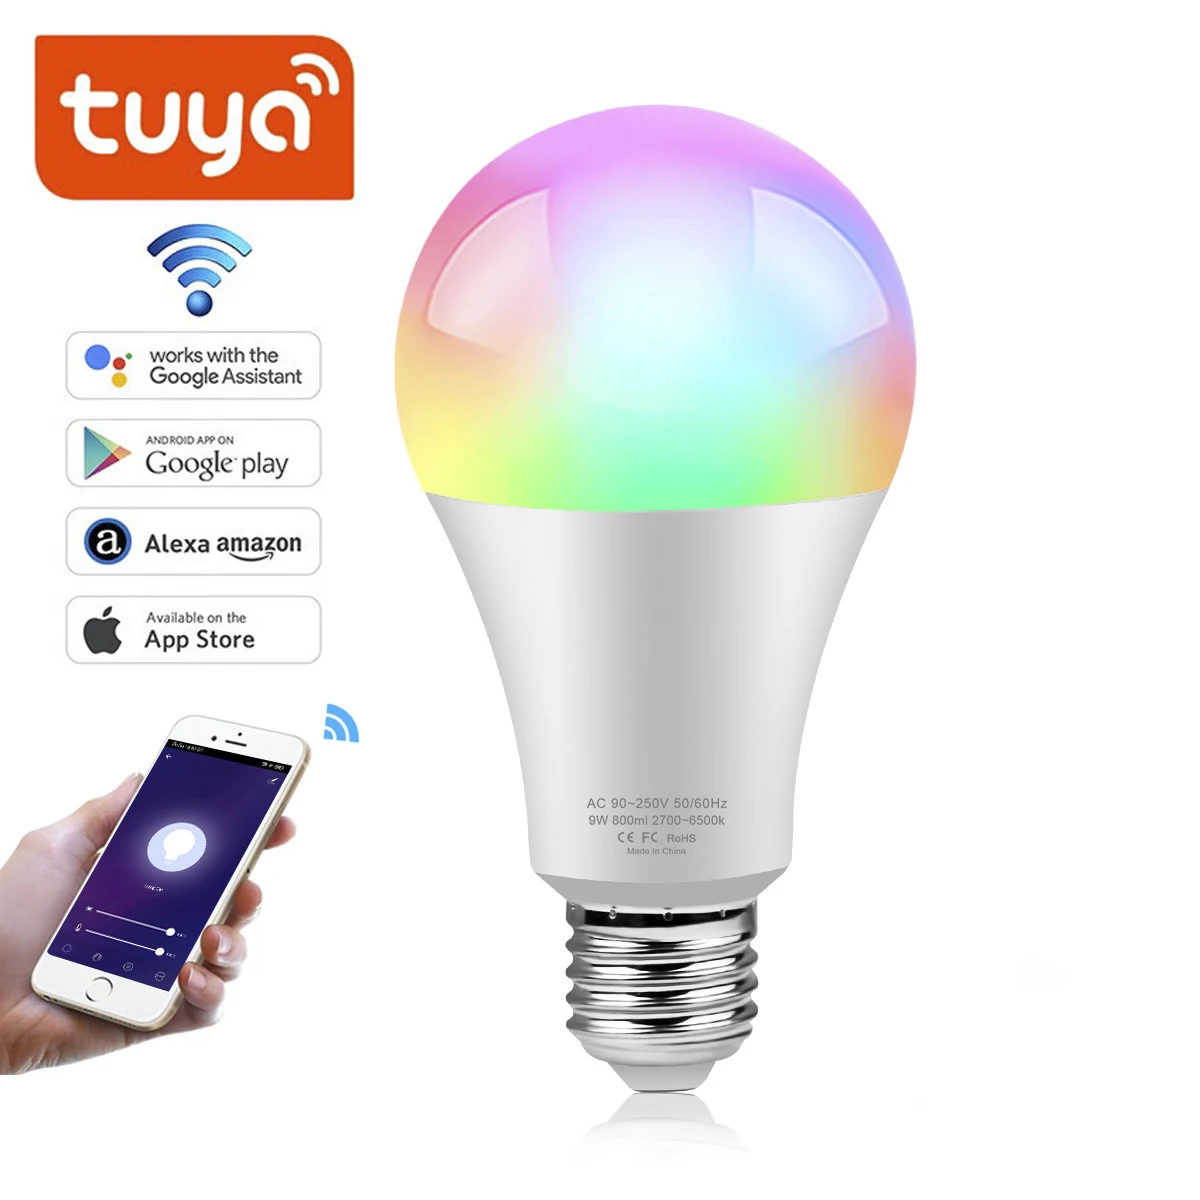 

WiFi Smart Lamp LED Light Bulb APP Voice Control 15W Color RGB Changeable Colorful RGBWW LED Lamp E27 B22 220V 110V Dimmable